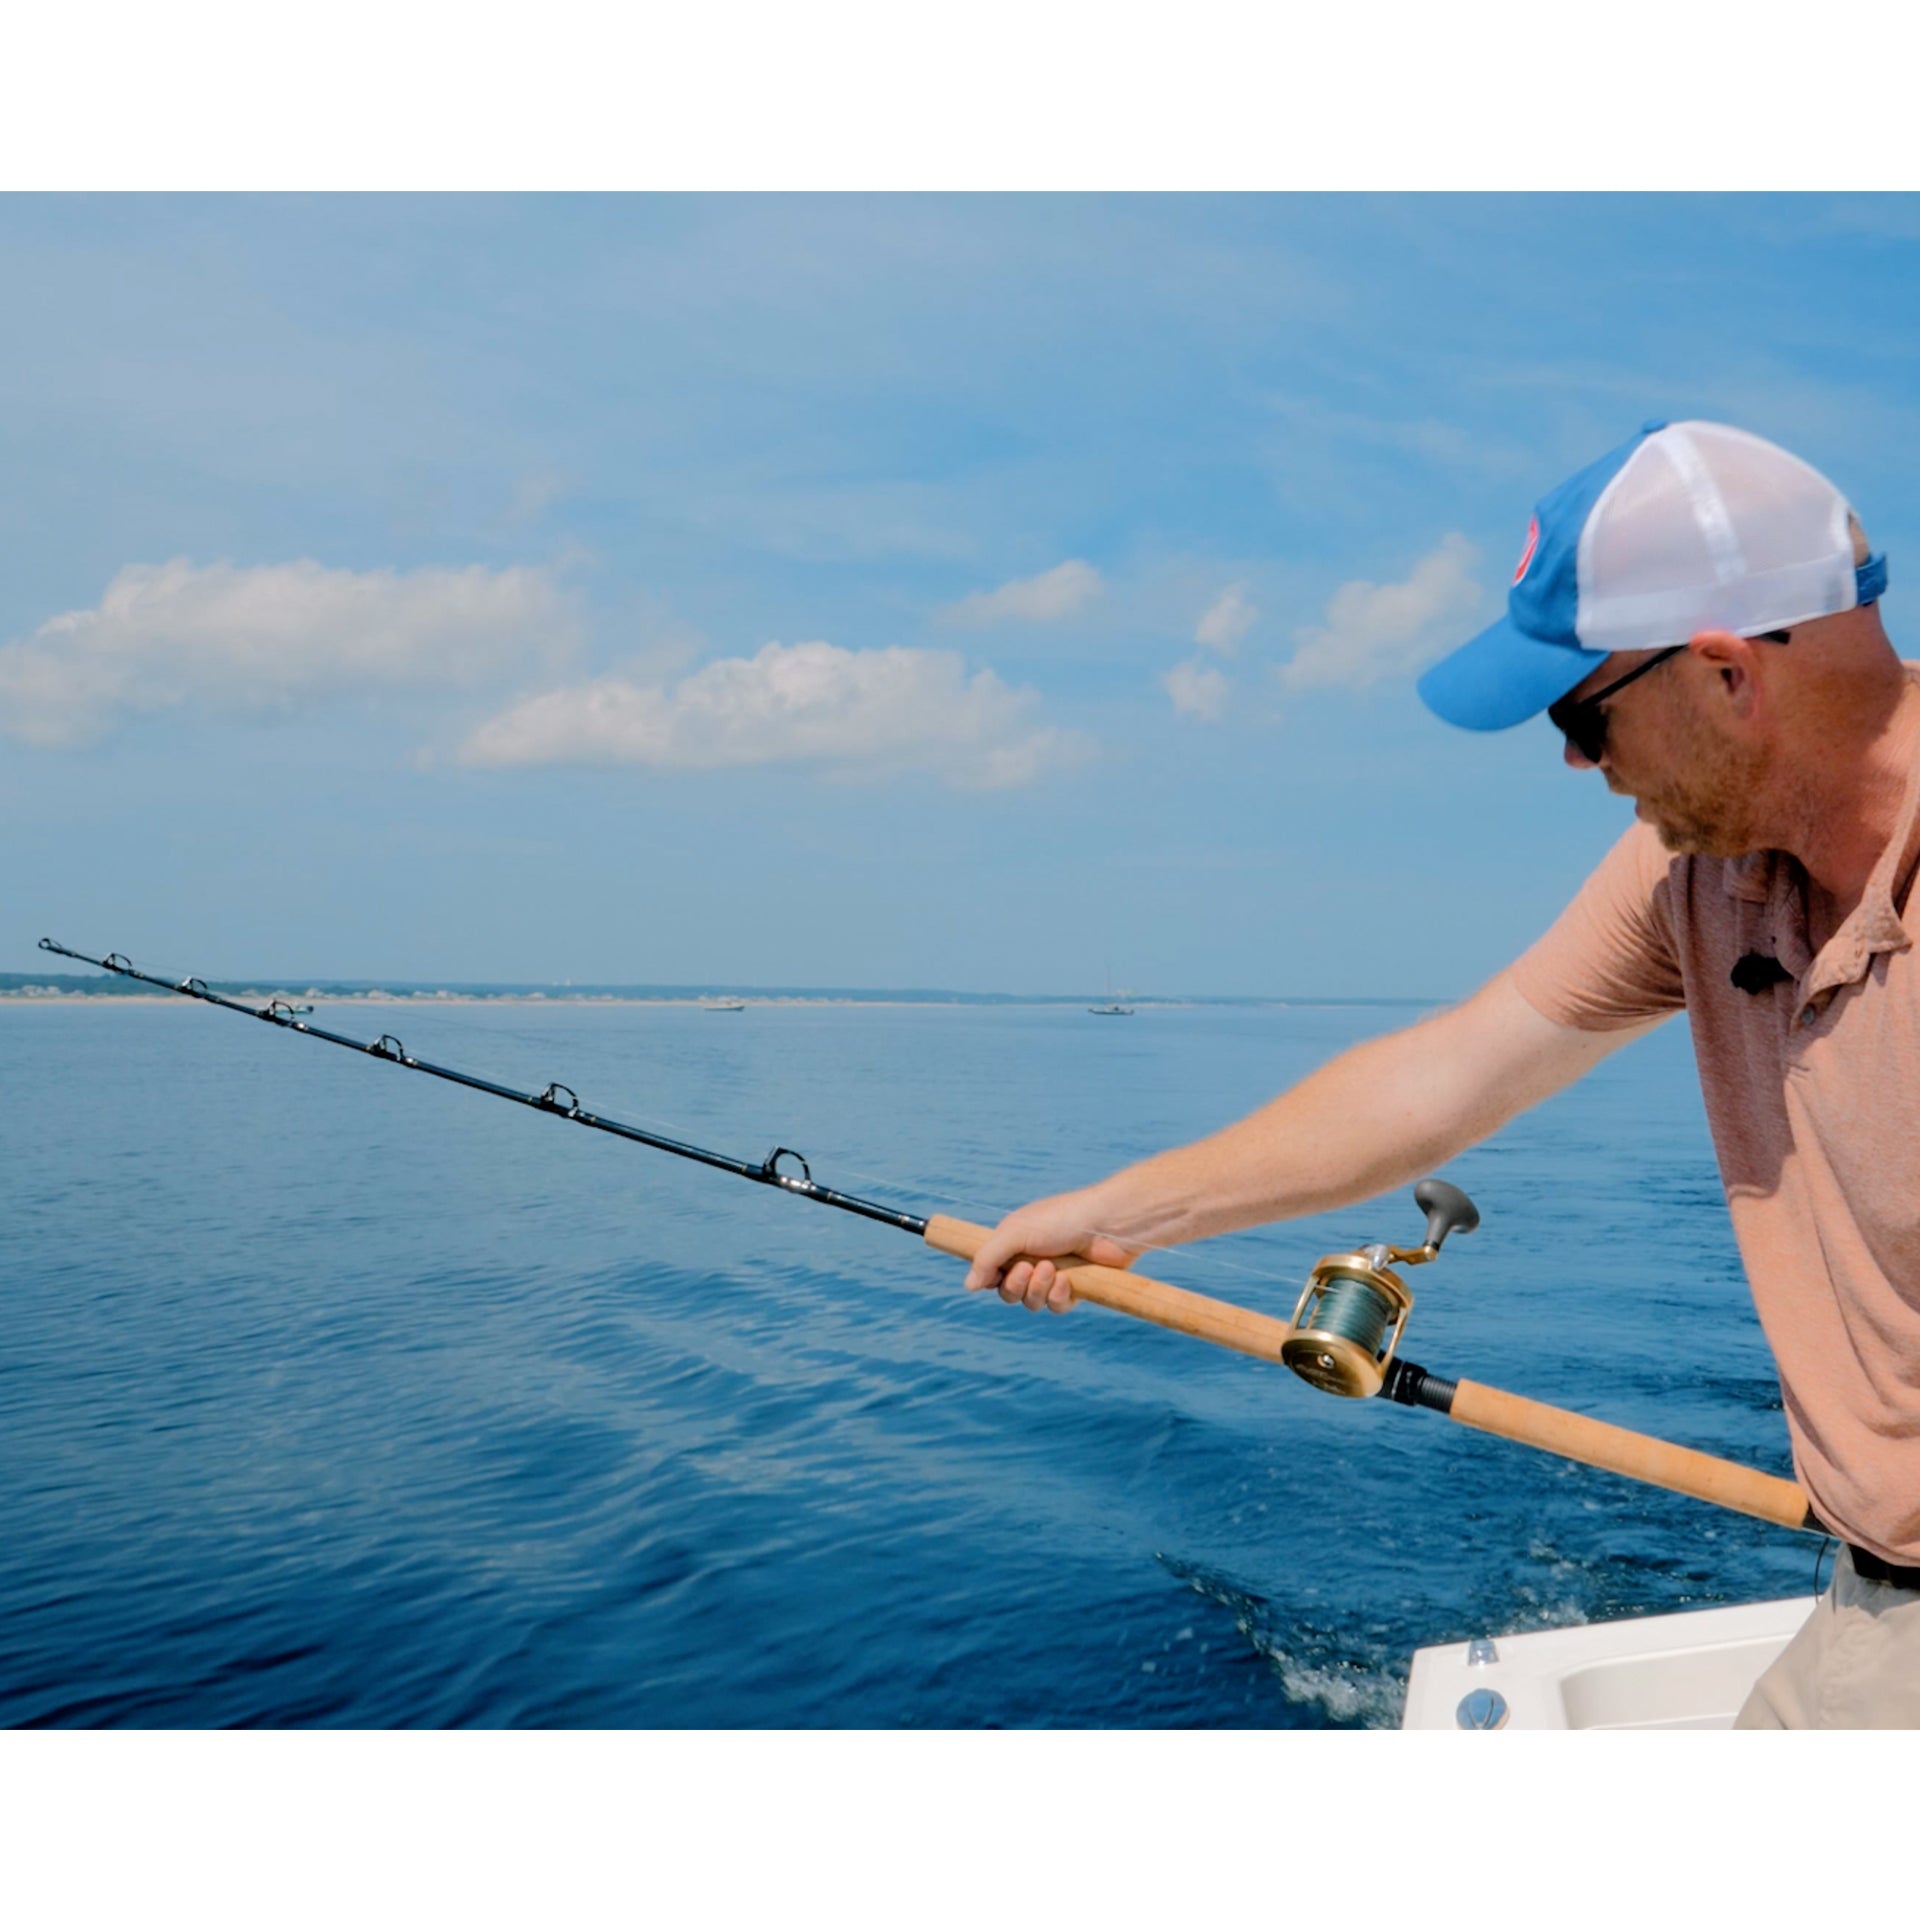 Casting Off: How to Ship a Fishing Pole Without Damage